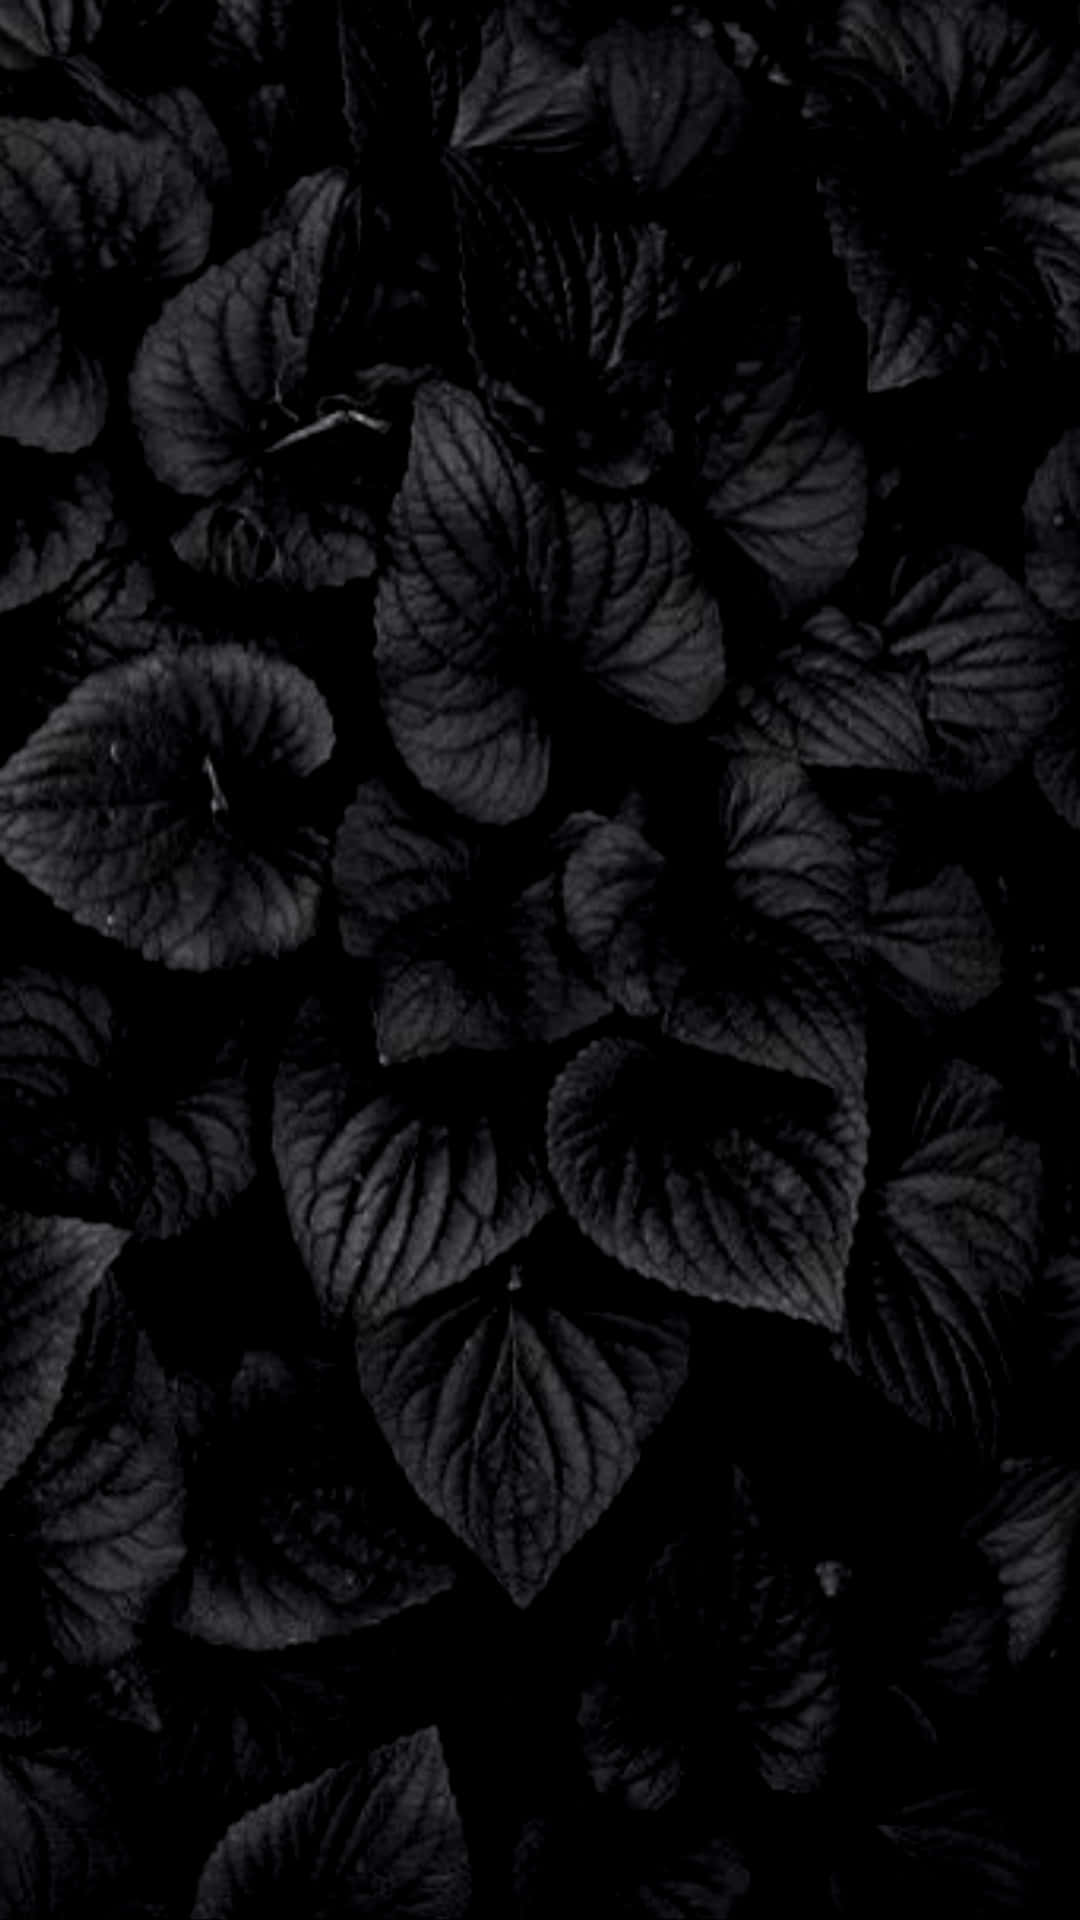 A Black Background With Leaves In The Dark Wallpaper